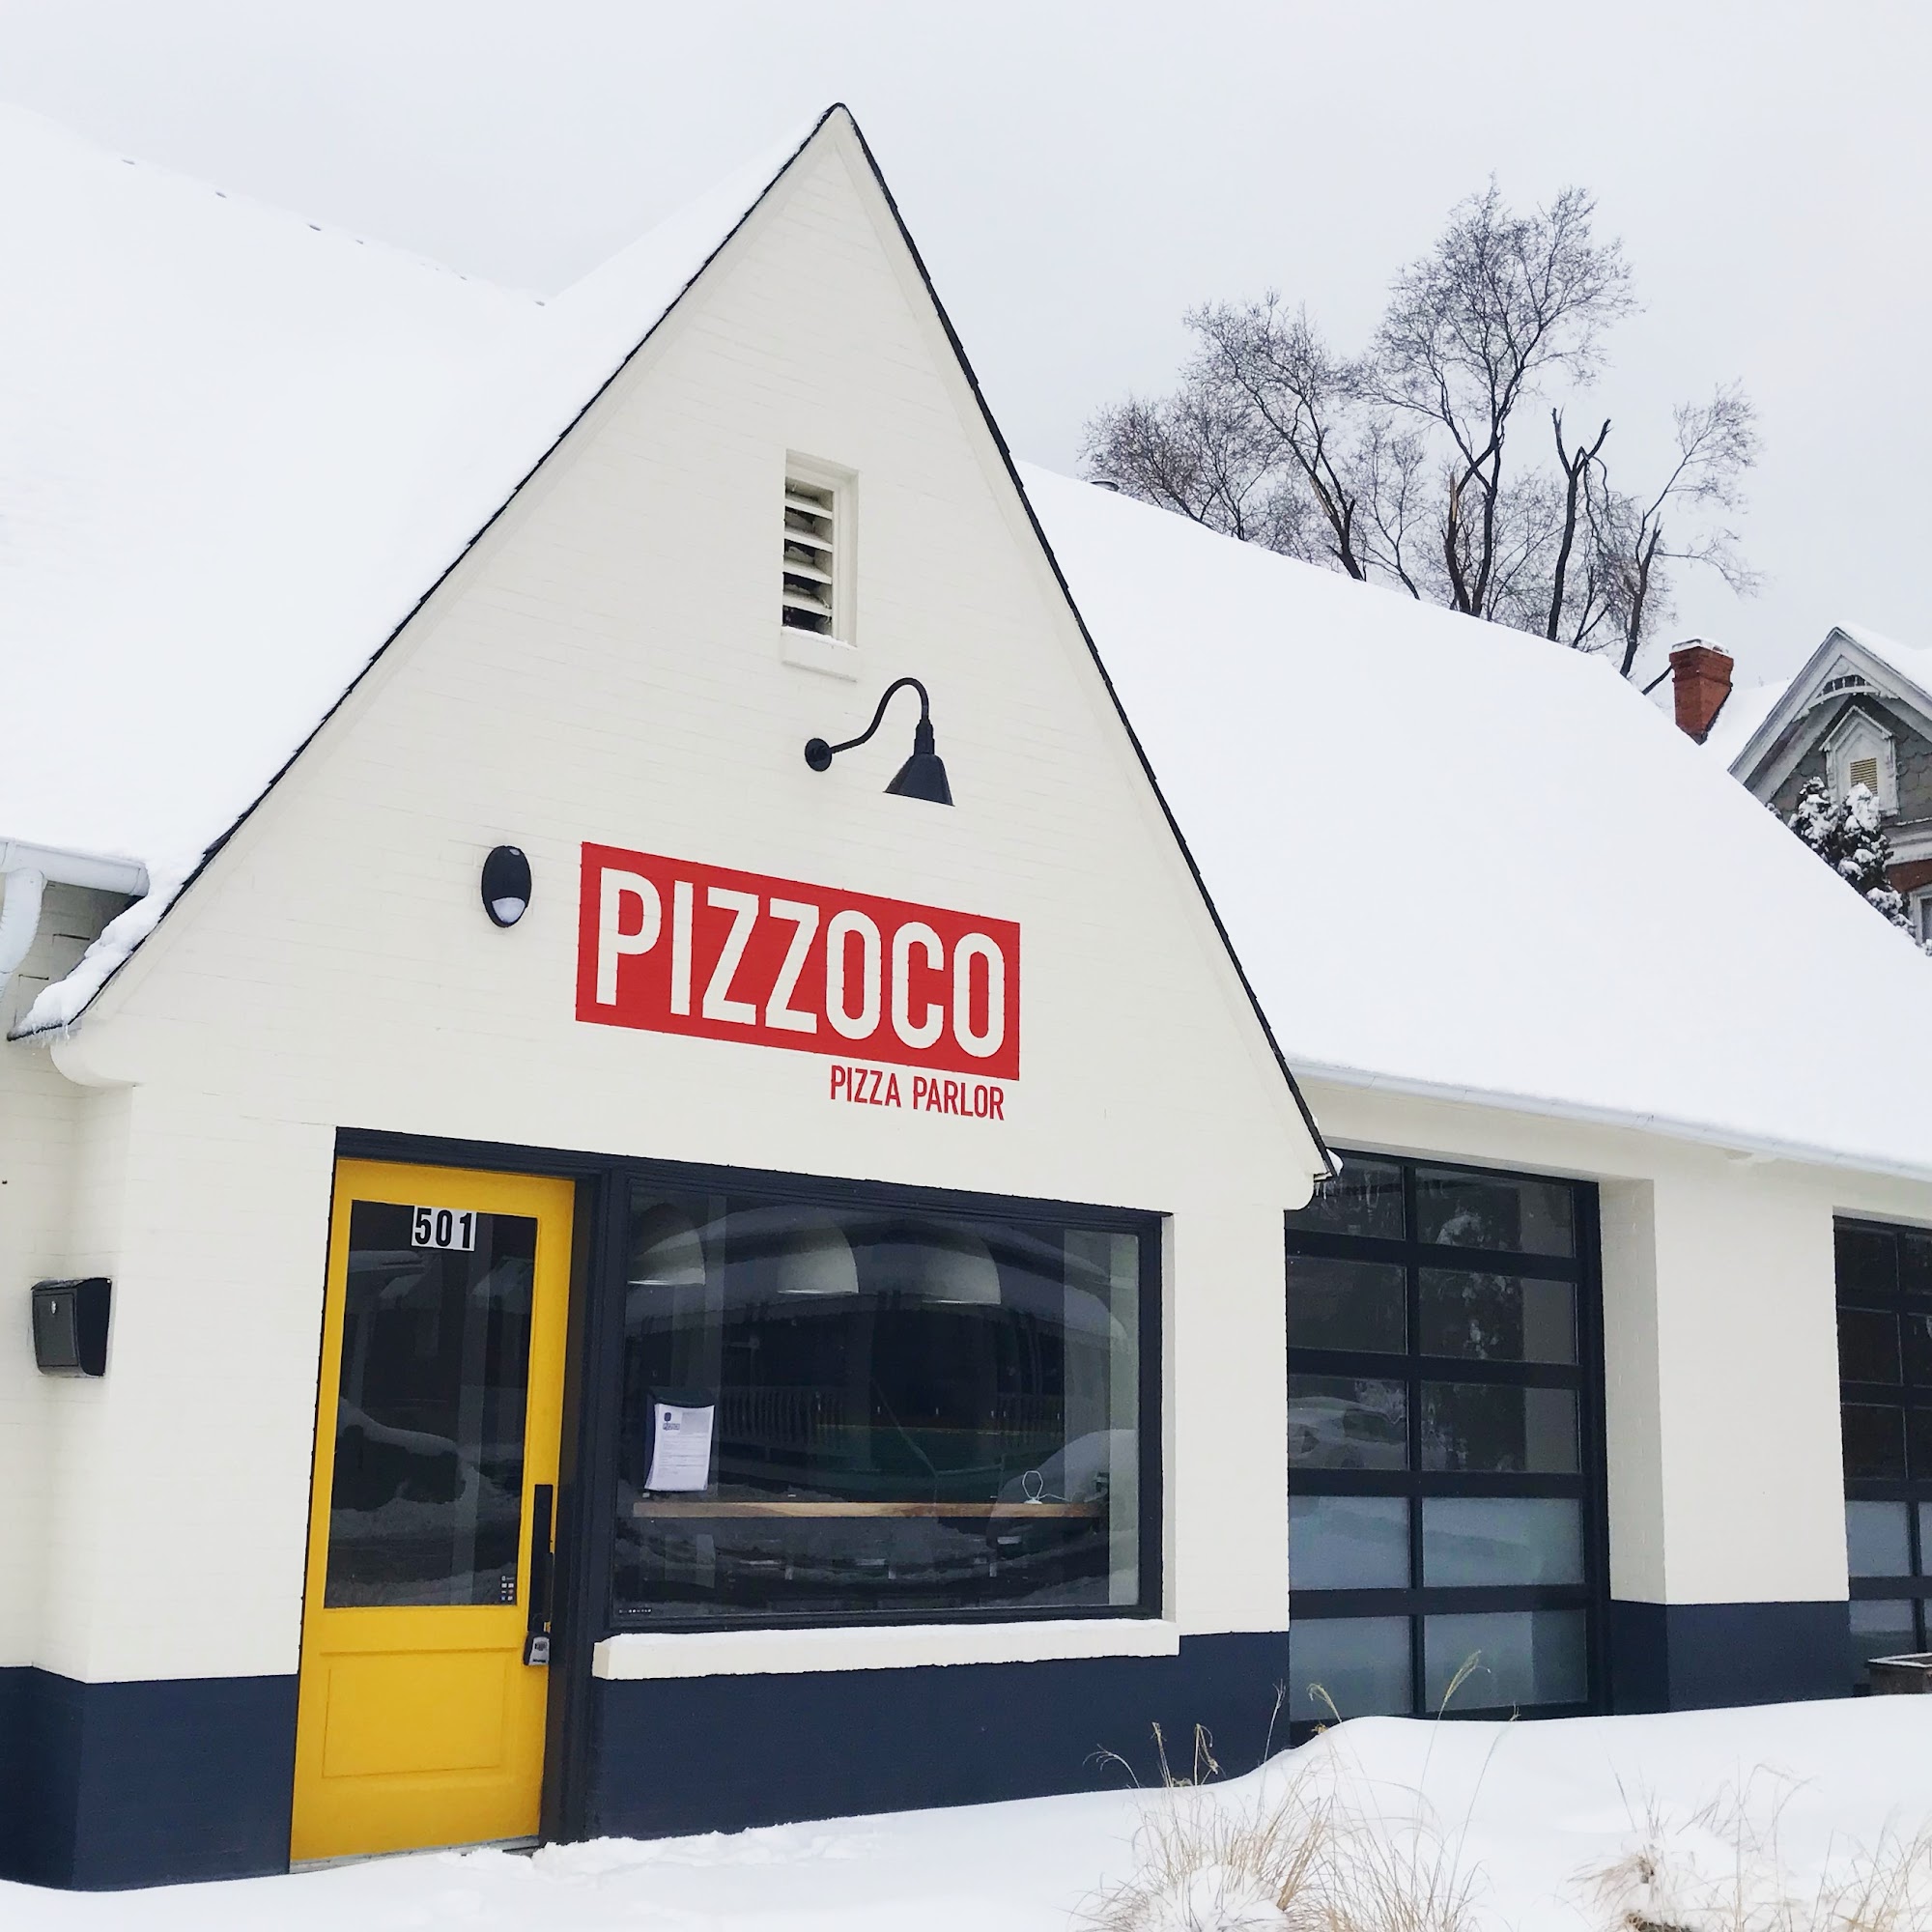 Pizzoco Pizza Parlor